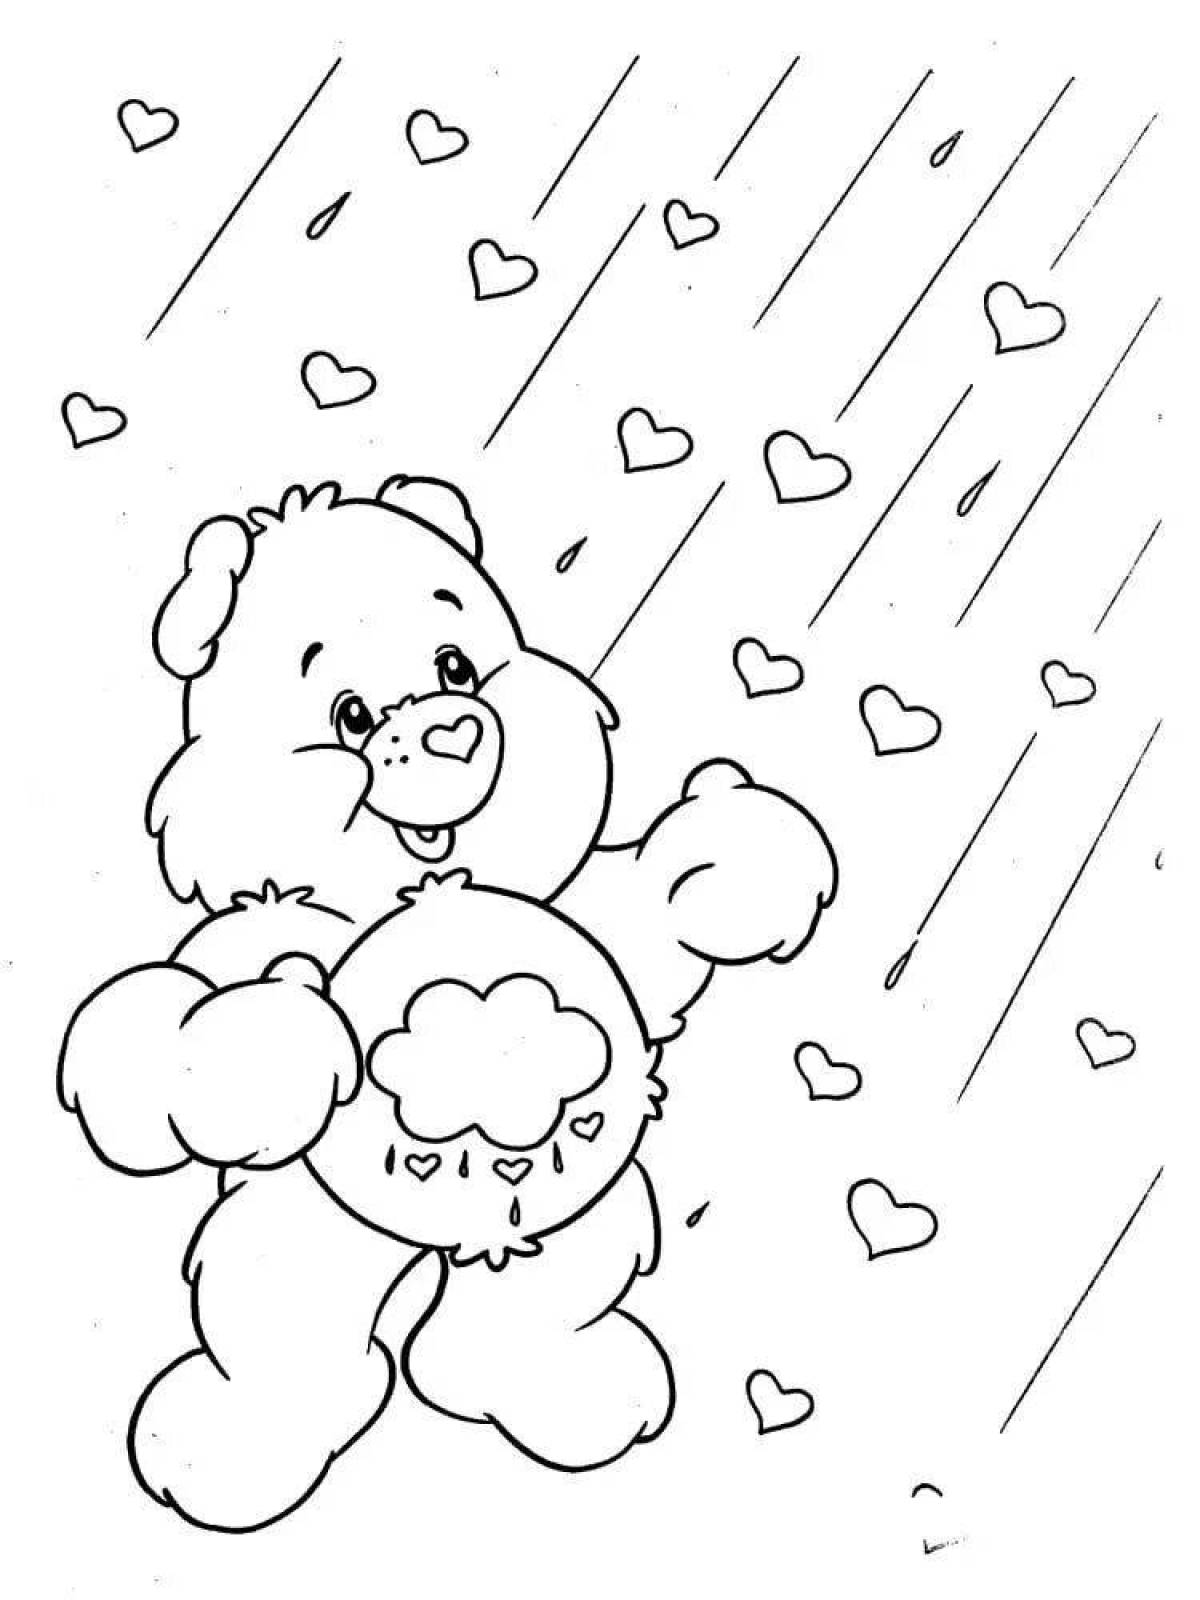 Glowing care bears coloring page